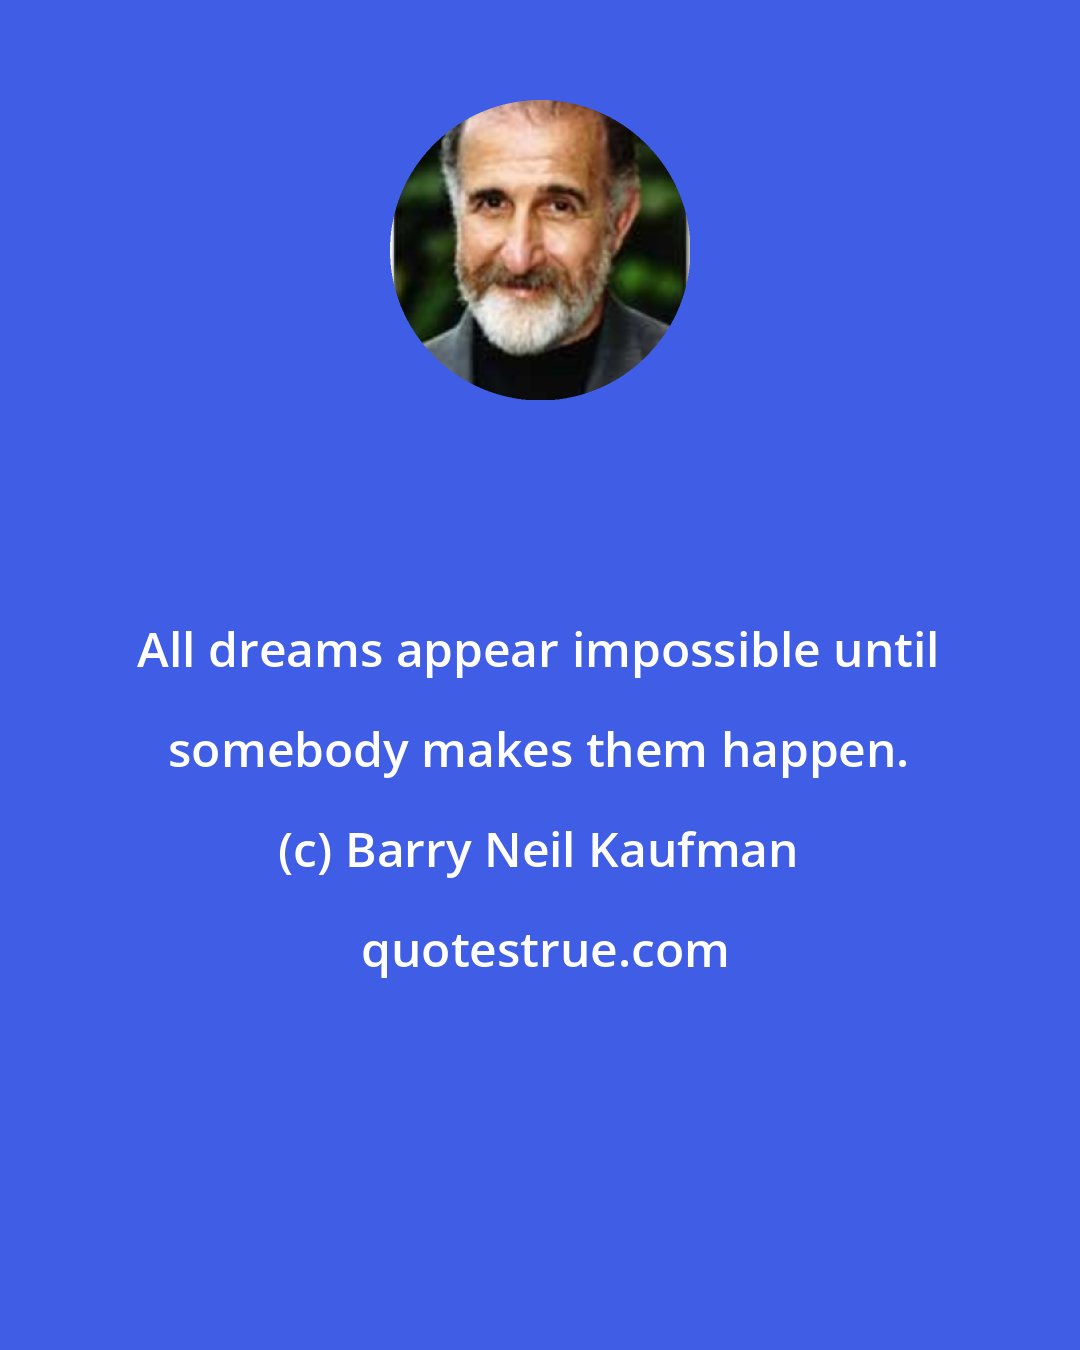 Barry Neil Kaufman: All dreams appear impossible until somebody makes them happen.